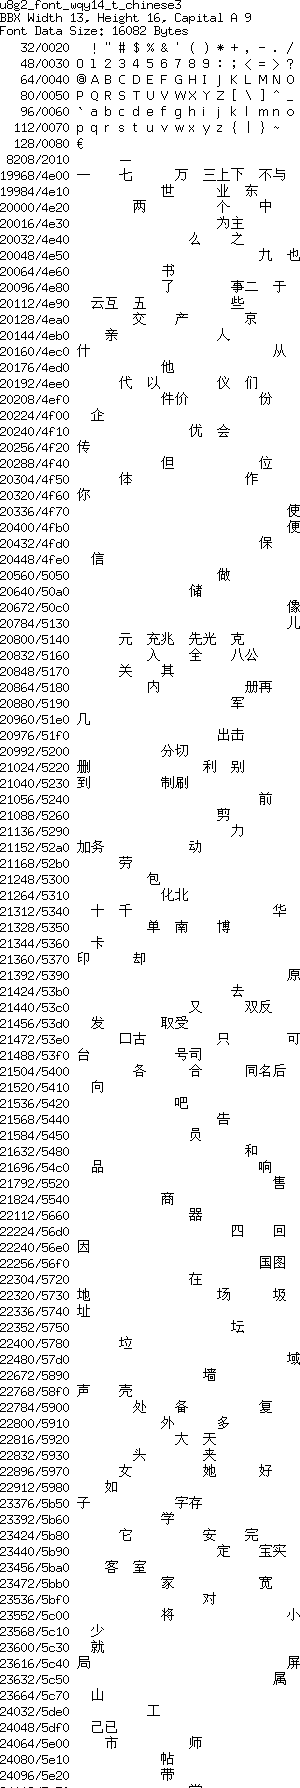 fntpic/u8g2_font_wqy14_t_chinese3.png